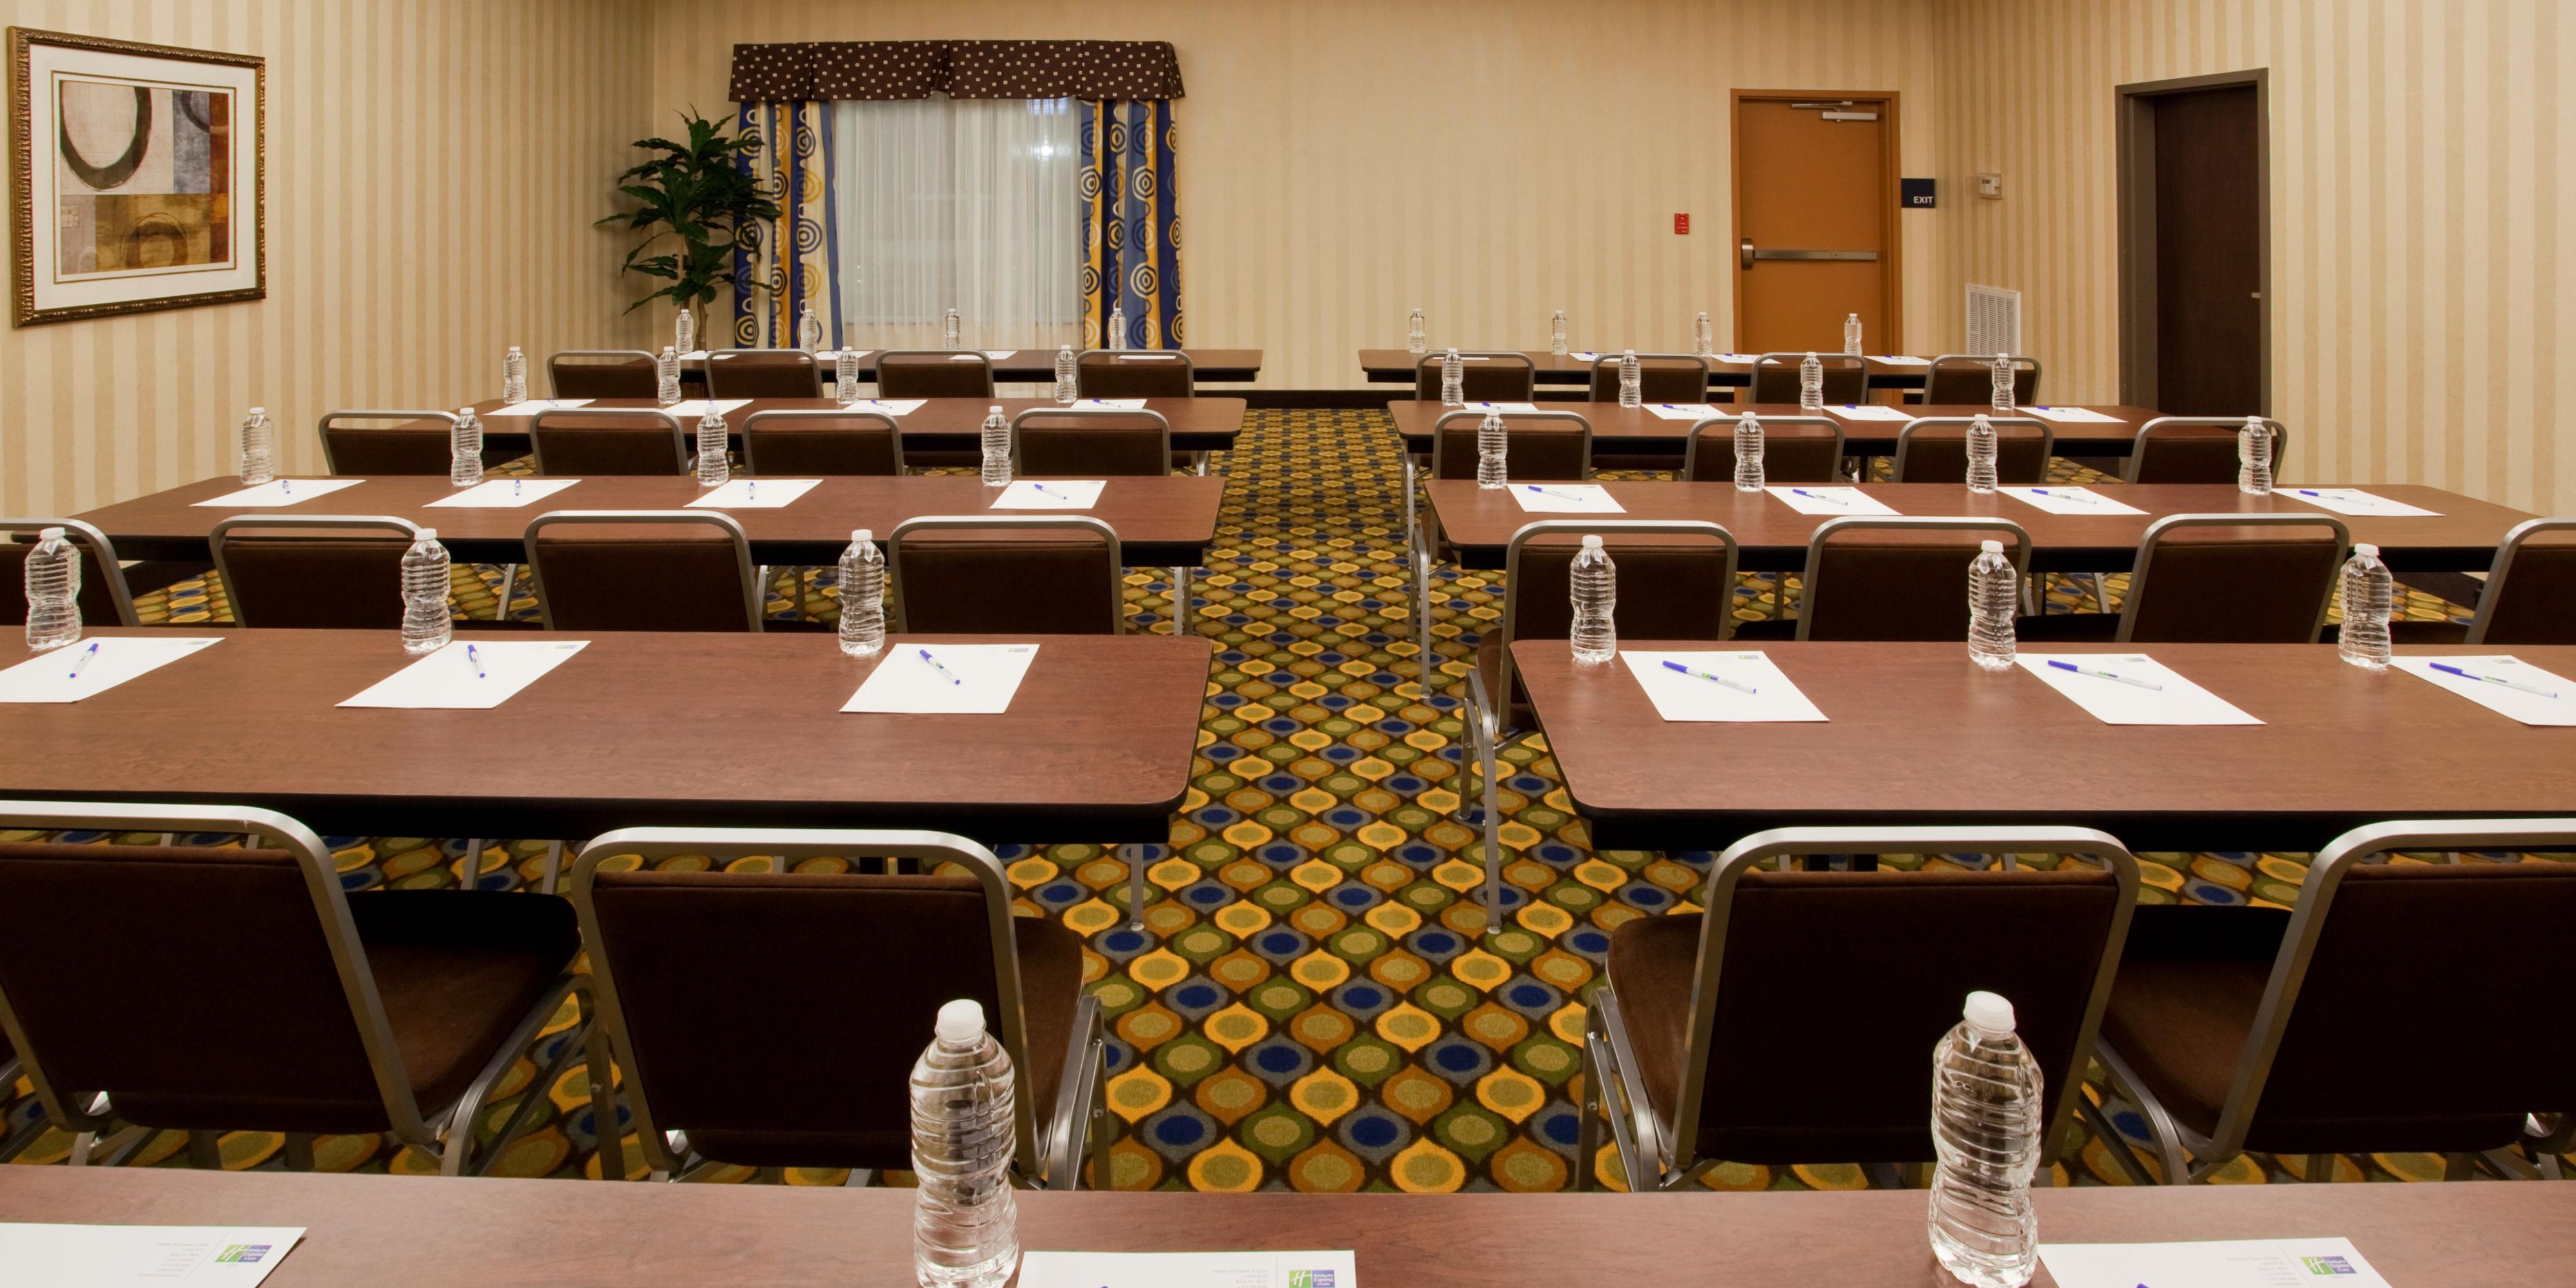 Plan your next training or meeting with us! Newly remodeled and ready for your gathering!